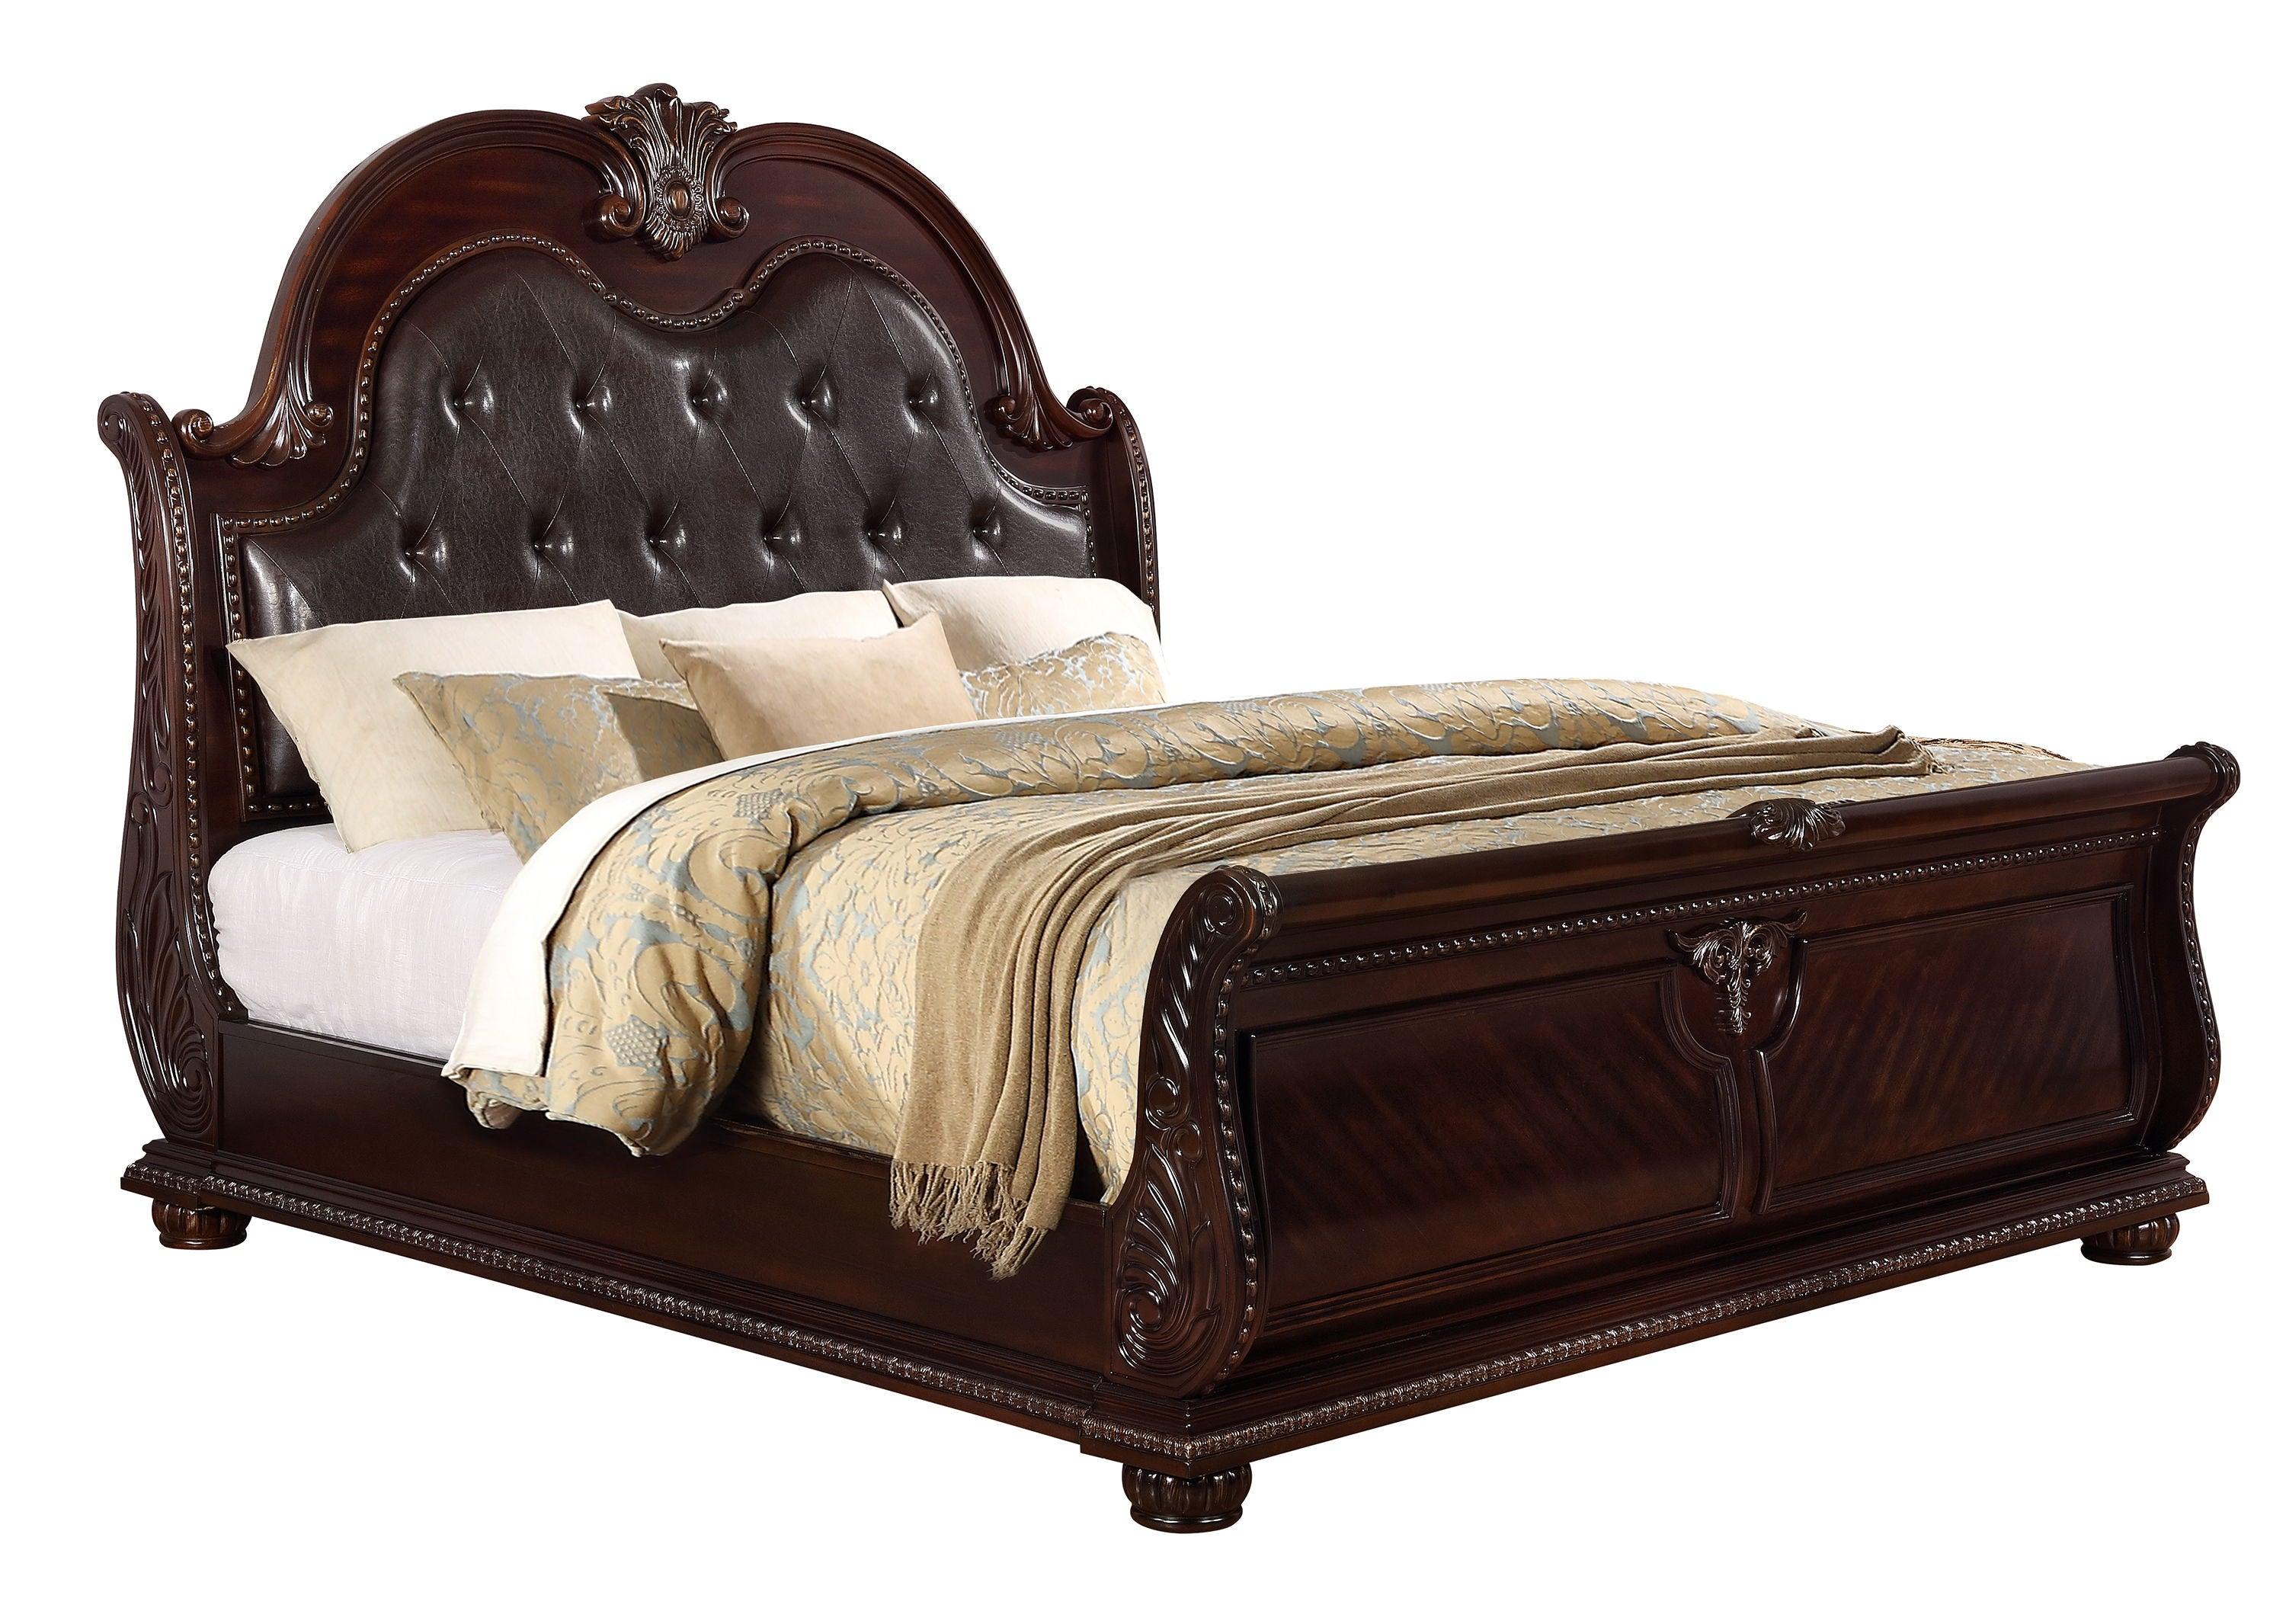 Crown Mark - Stanley - Bed - 5th Avenue Furniture